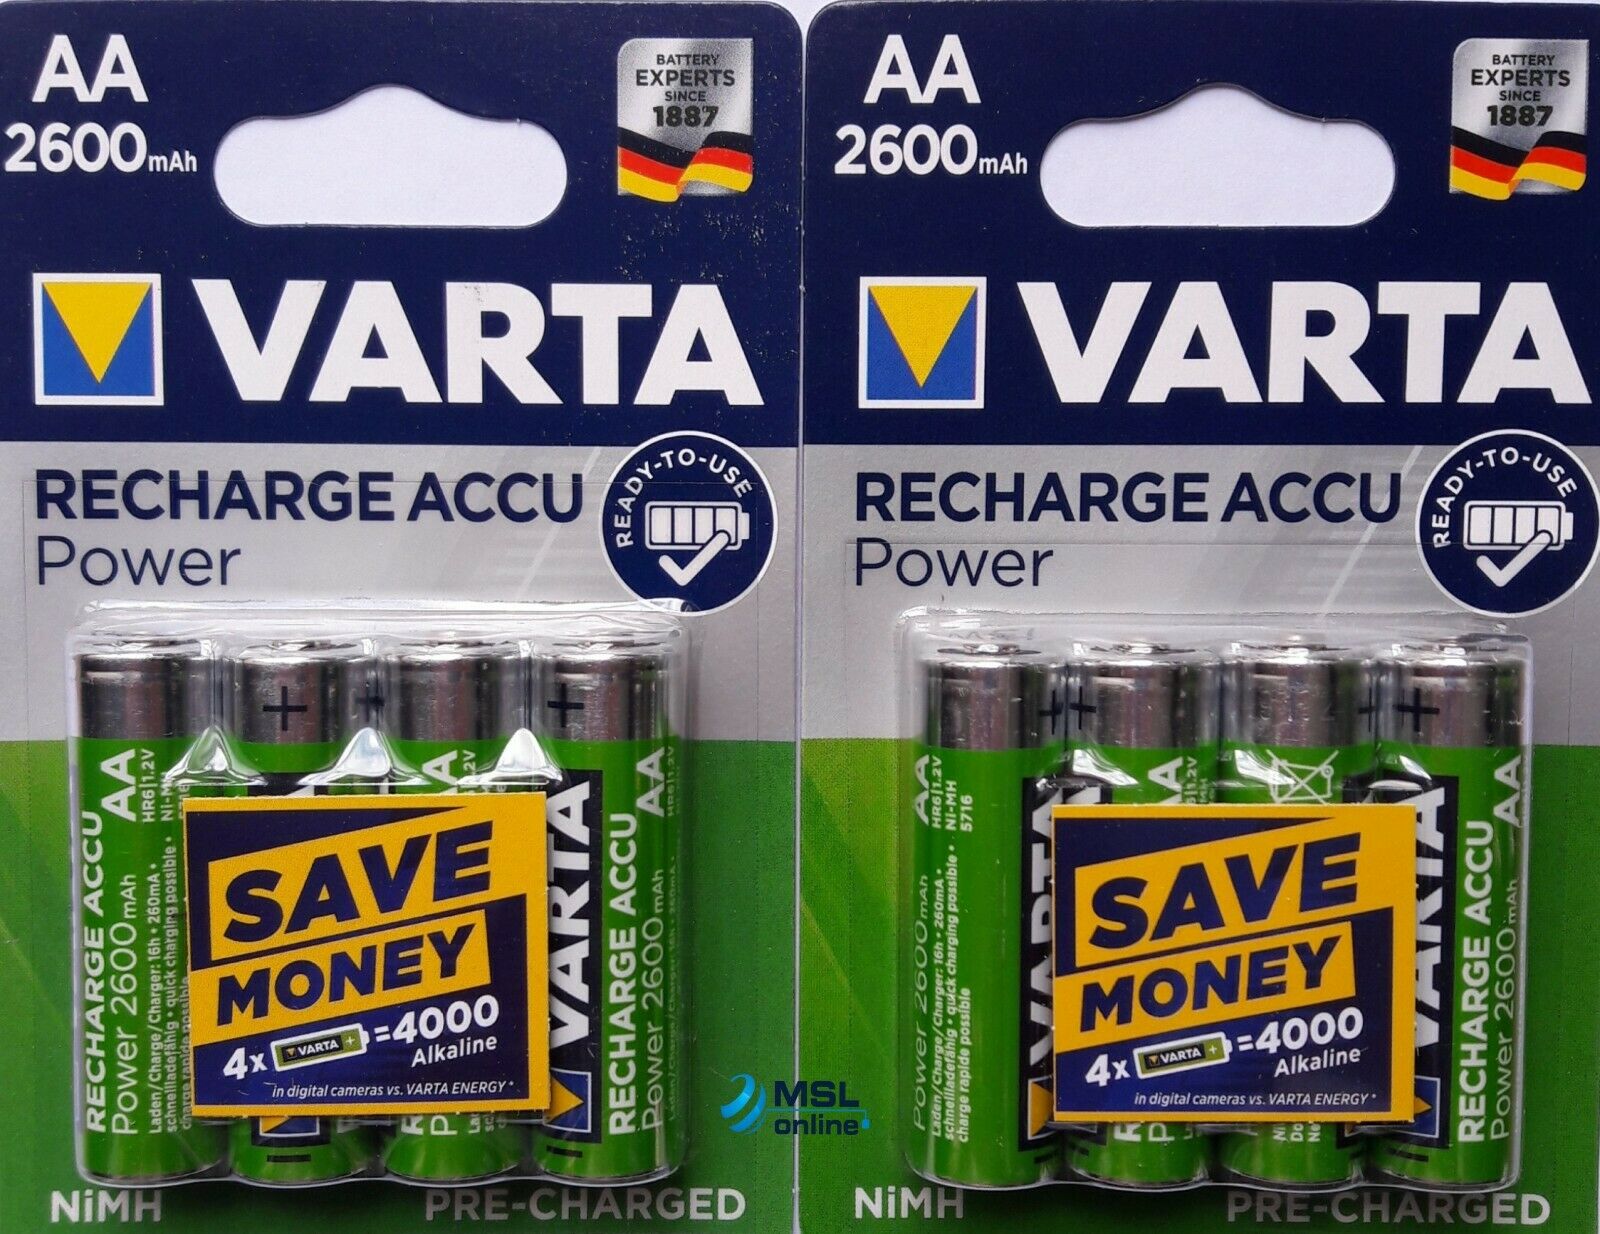 VARTA AA Ni-MH 2600 mAh Ready to Use Rechargeable batteries R6 LR6 HR6 